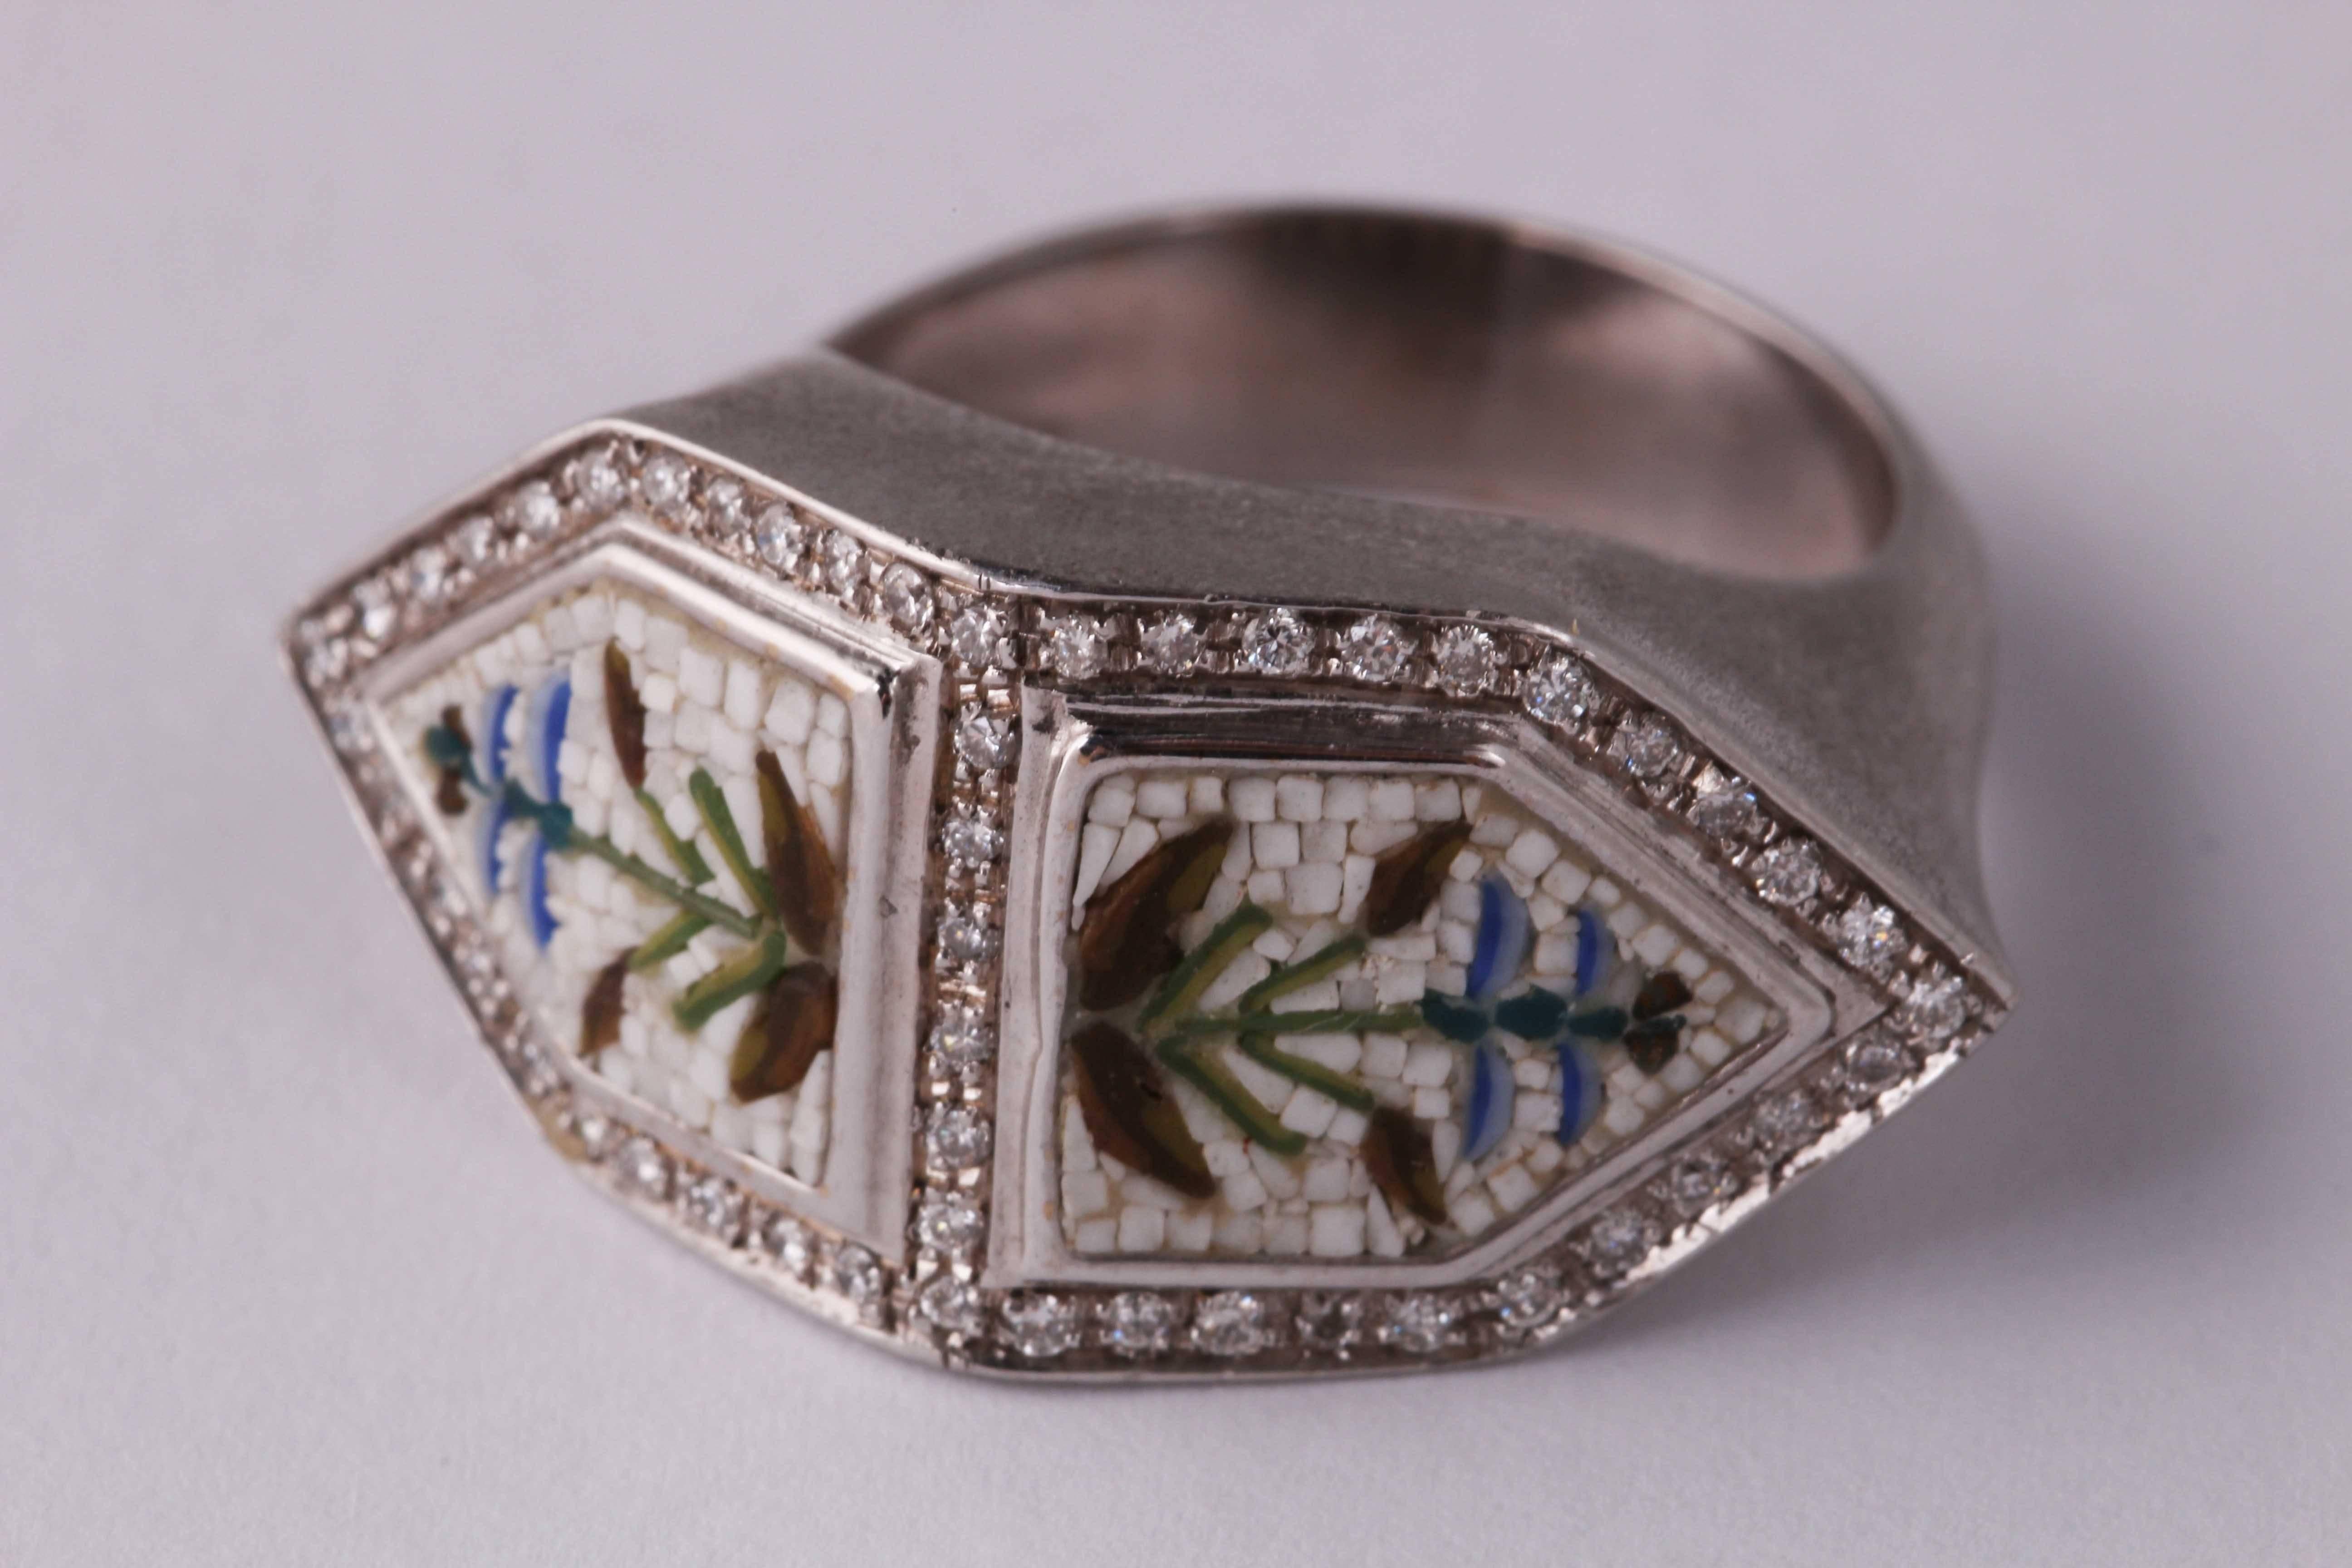 Micromosaic and diamonds white 18 ct gold ring.
Handcrafted in Rome by 